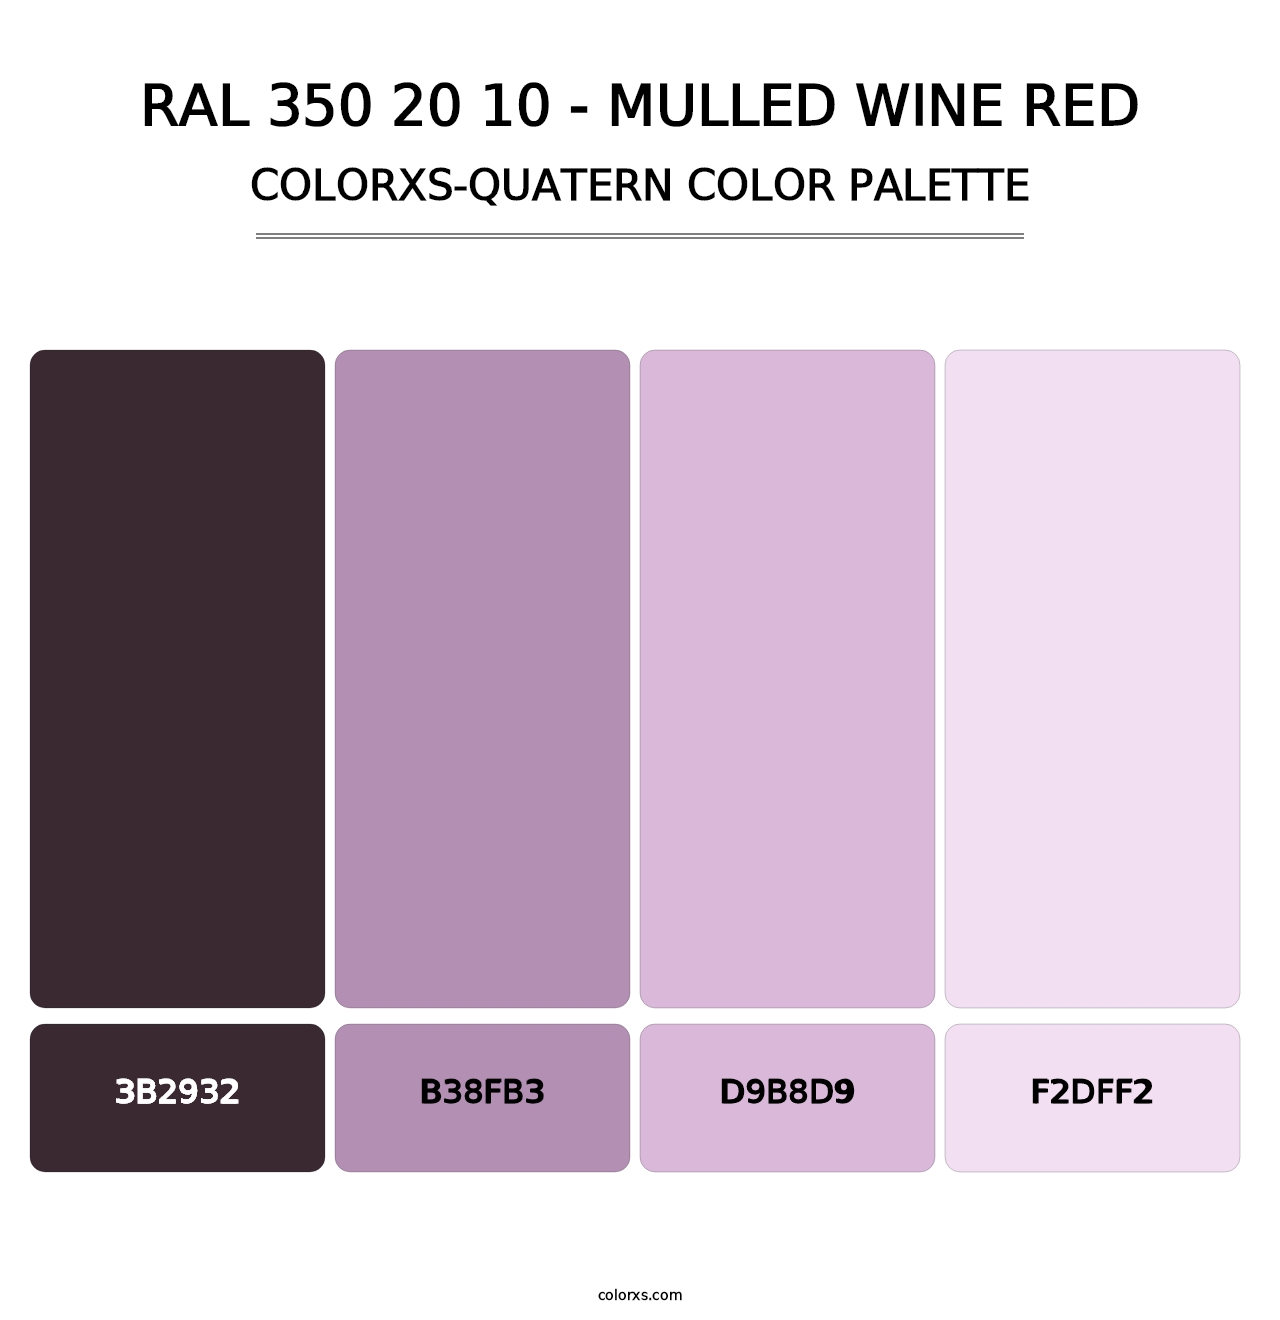 RAL 350 20 10 - Mulled Wine Red - Colorxs Quatern Palette